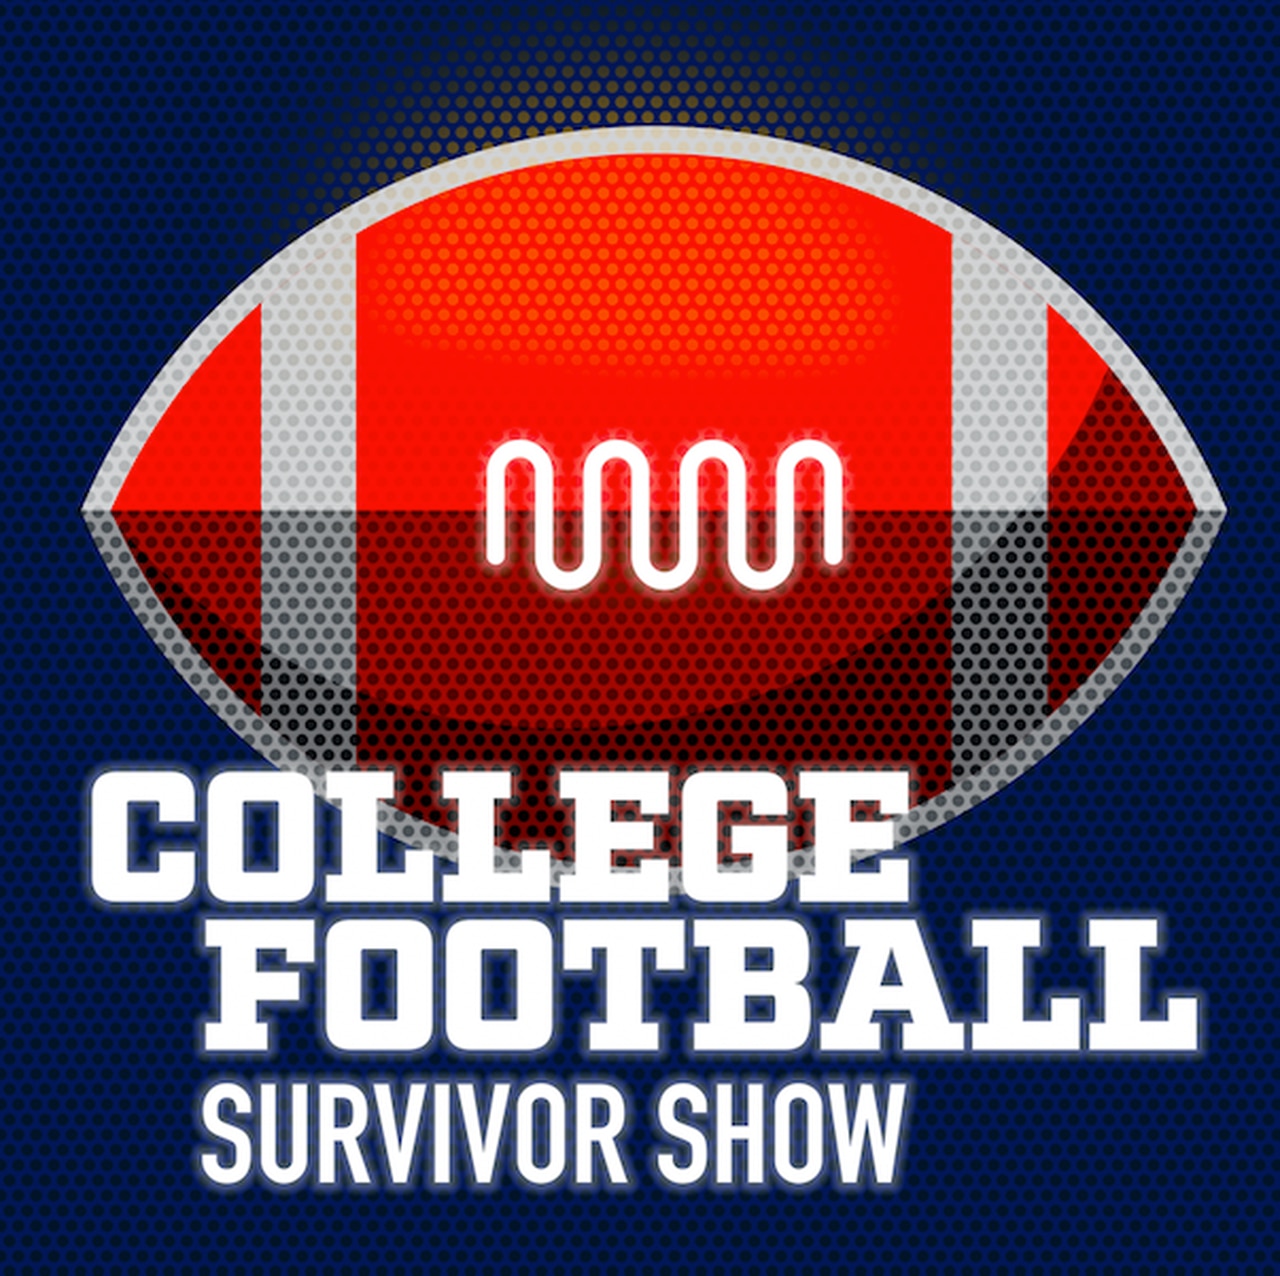 Georgia-TCU National Championship picks, and Ohio State and Michigan lessons from the semifinals: College Football Survivor Show